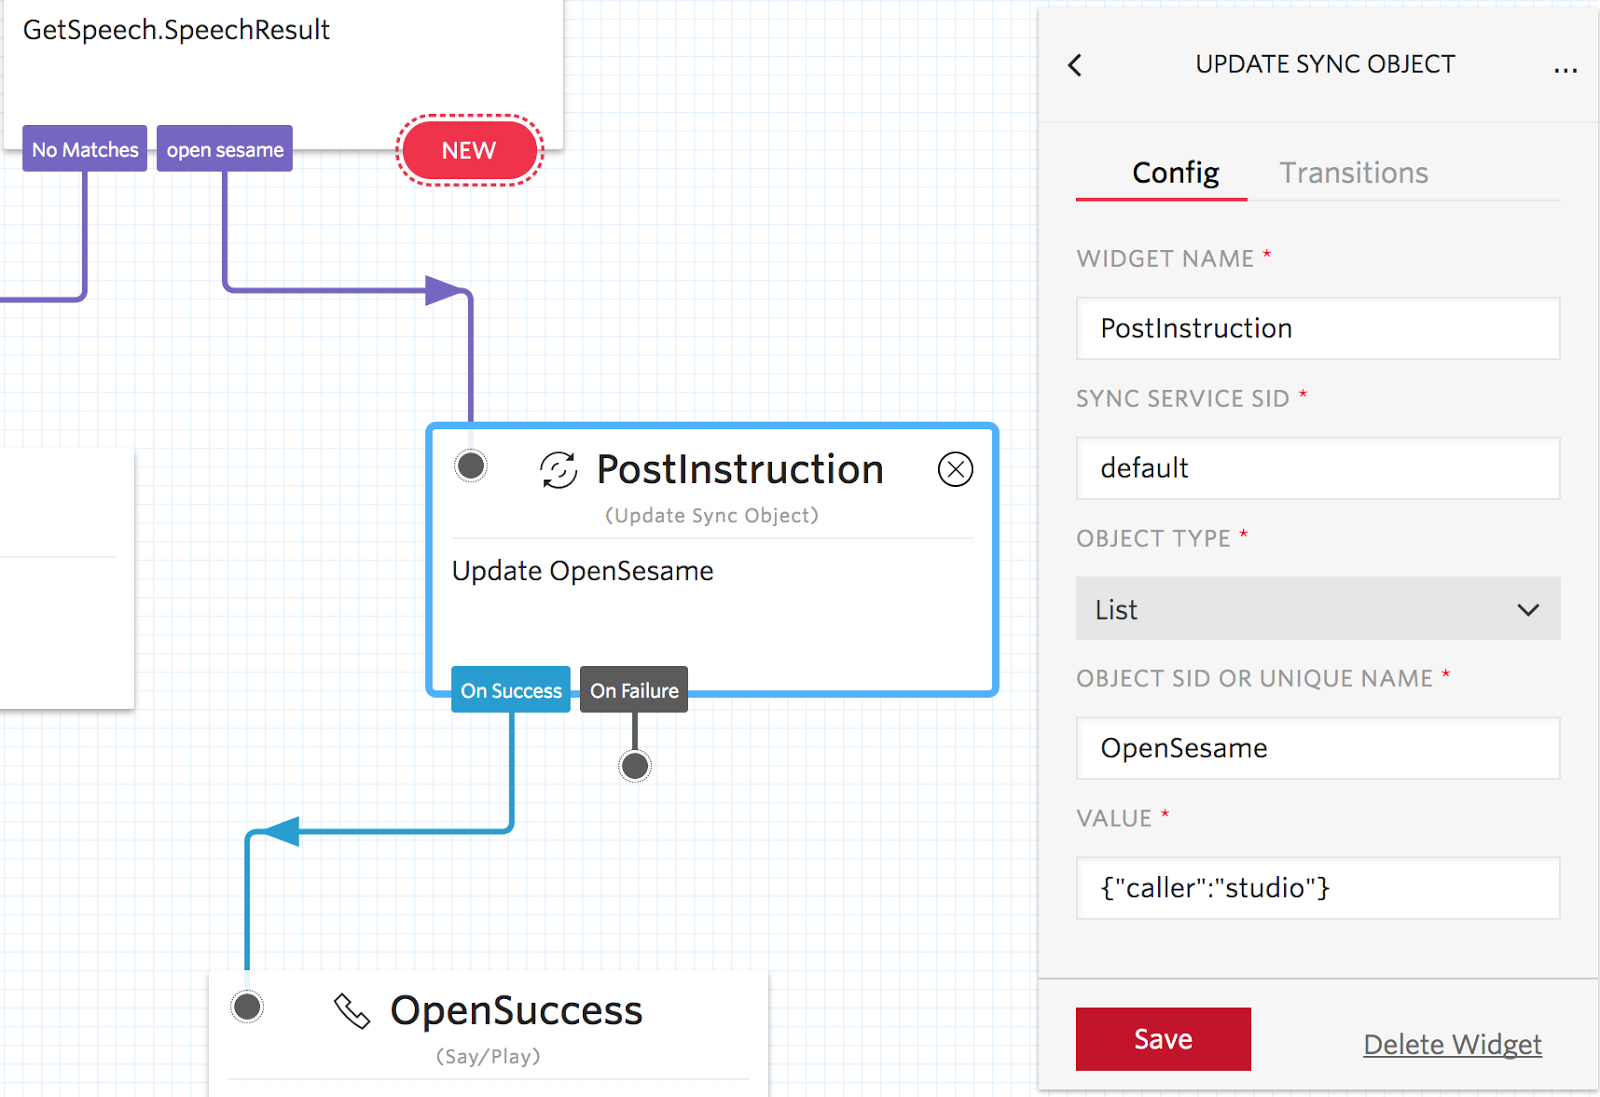 POST to an endpoint with Twilio Studio